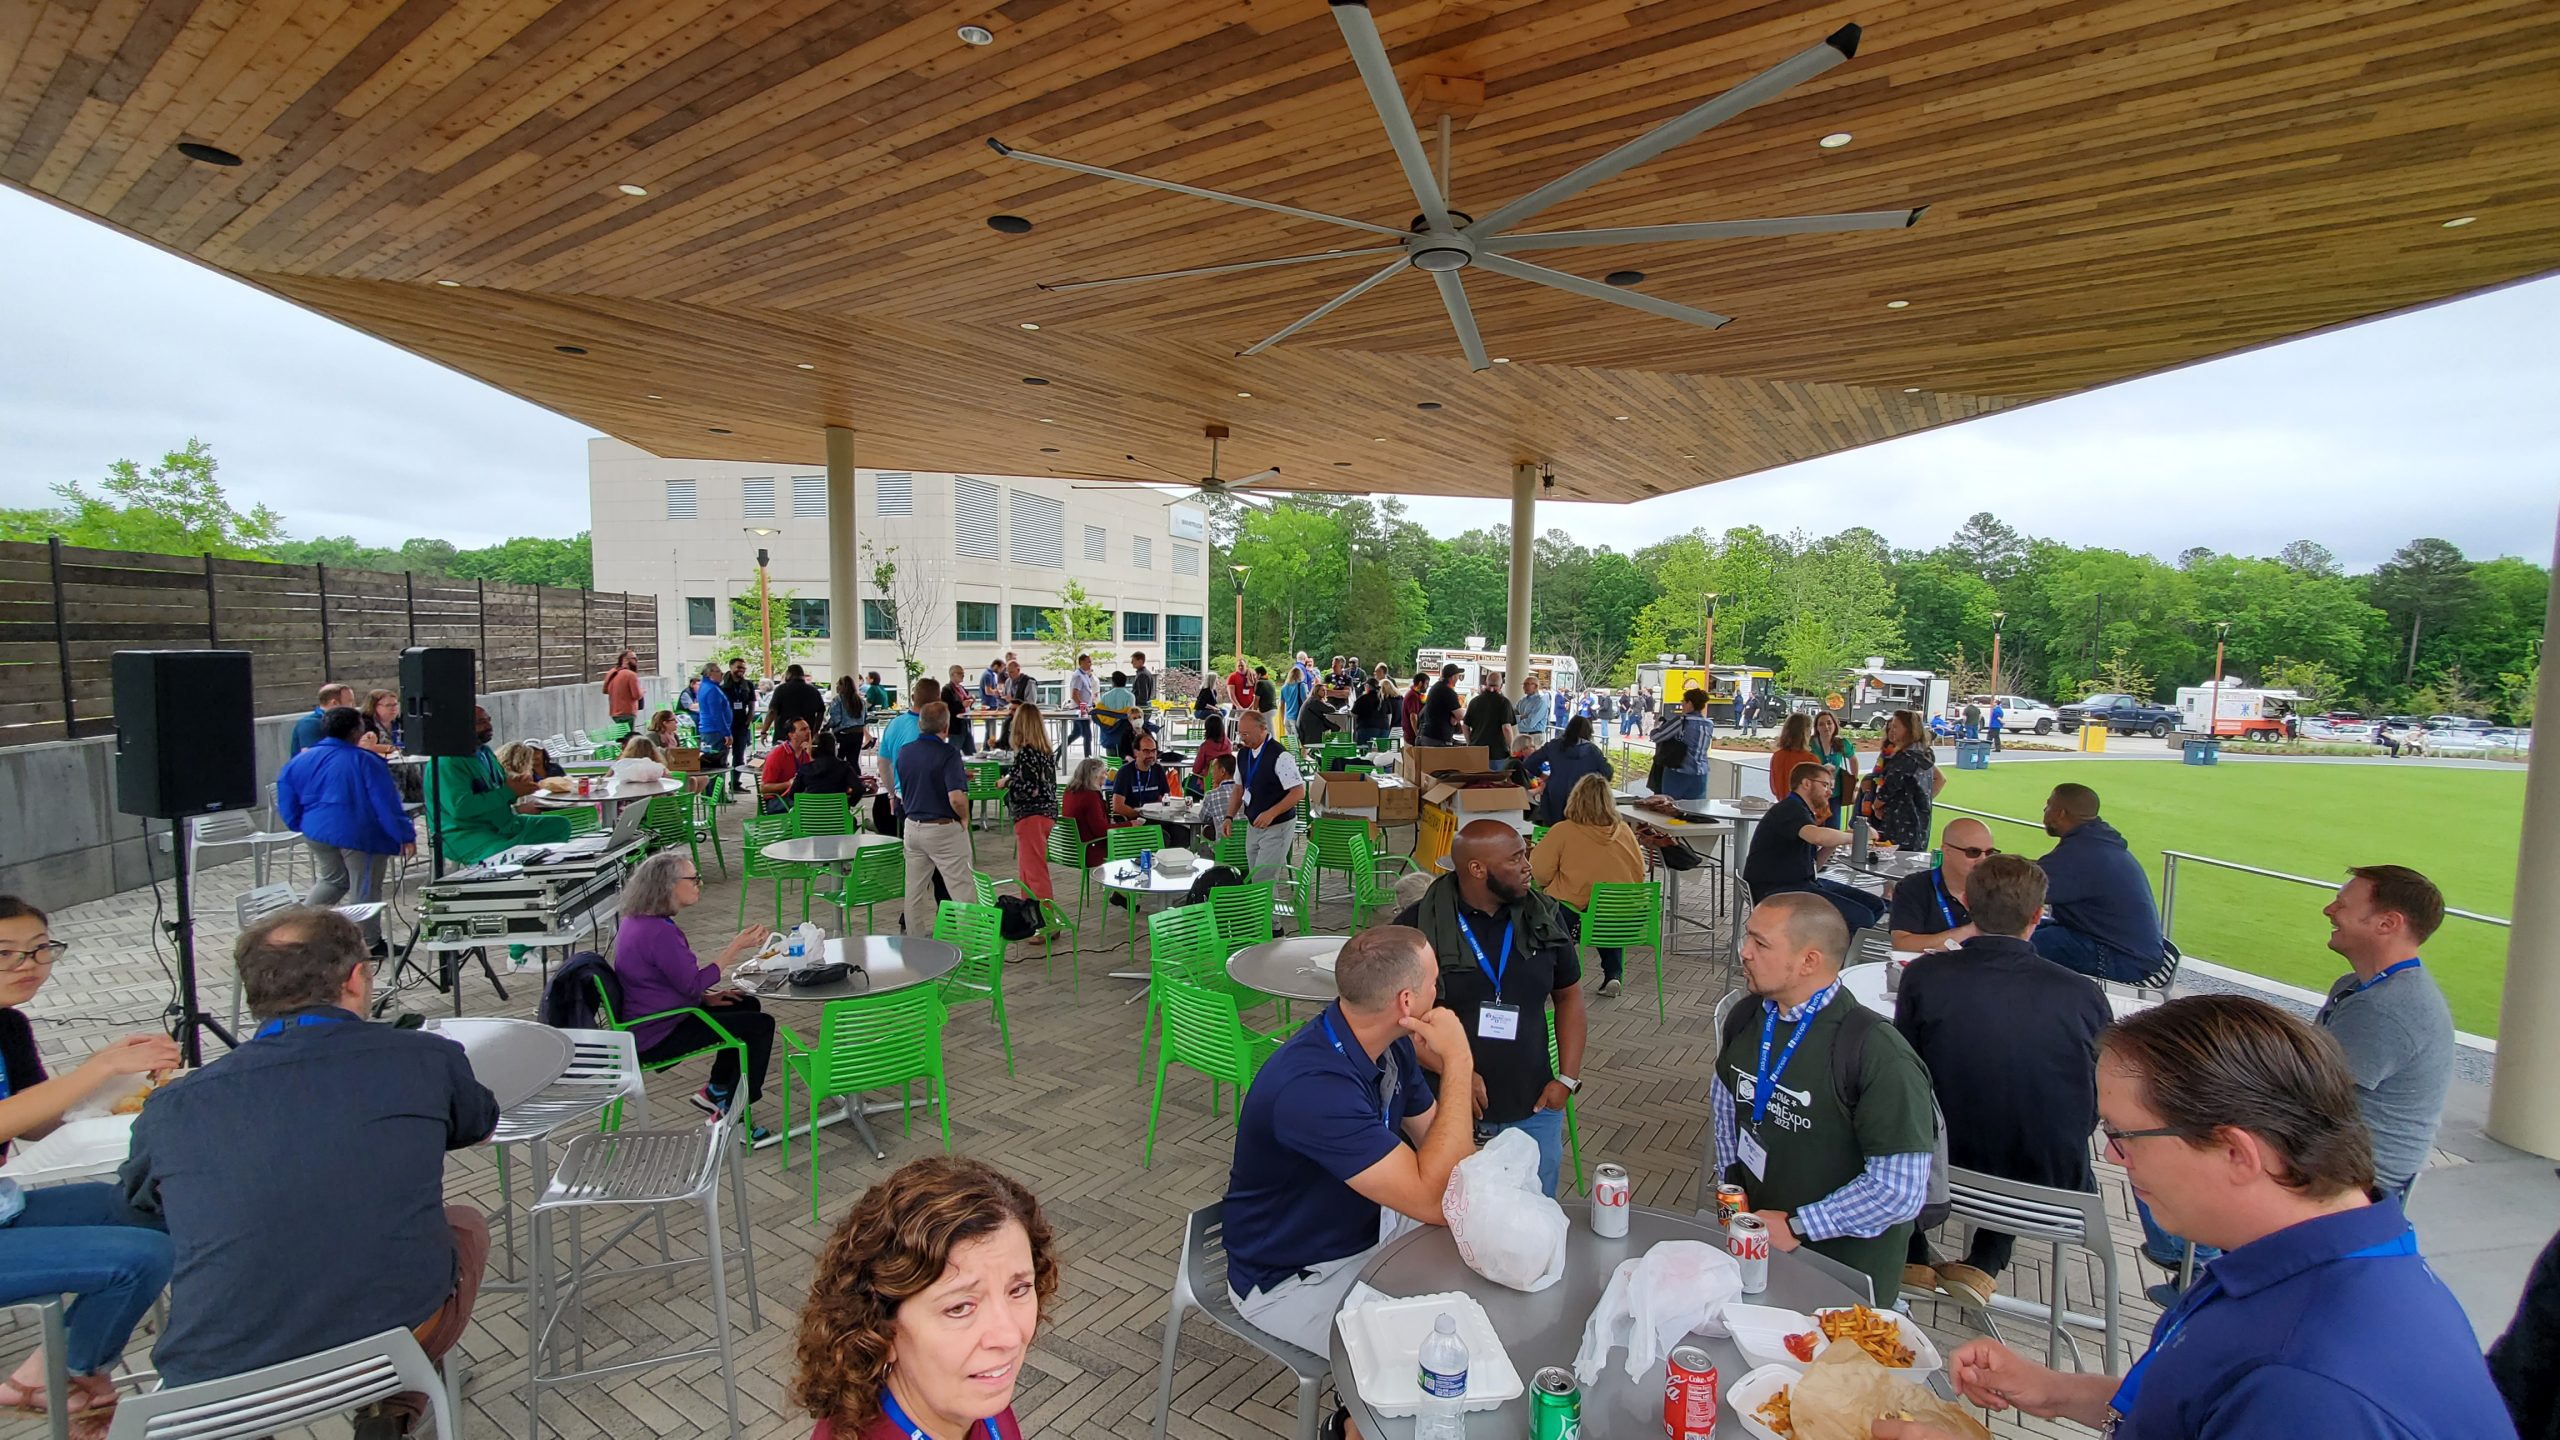 TechExpo attendees sitting at tables enjoying the food and the outdoor setting under the pavilion.